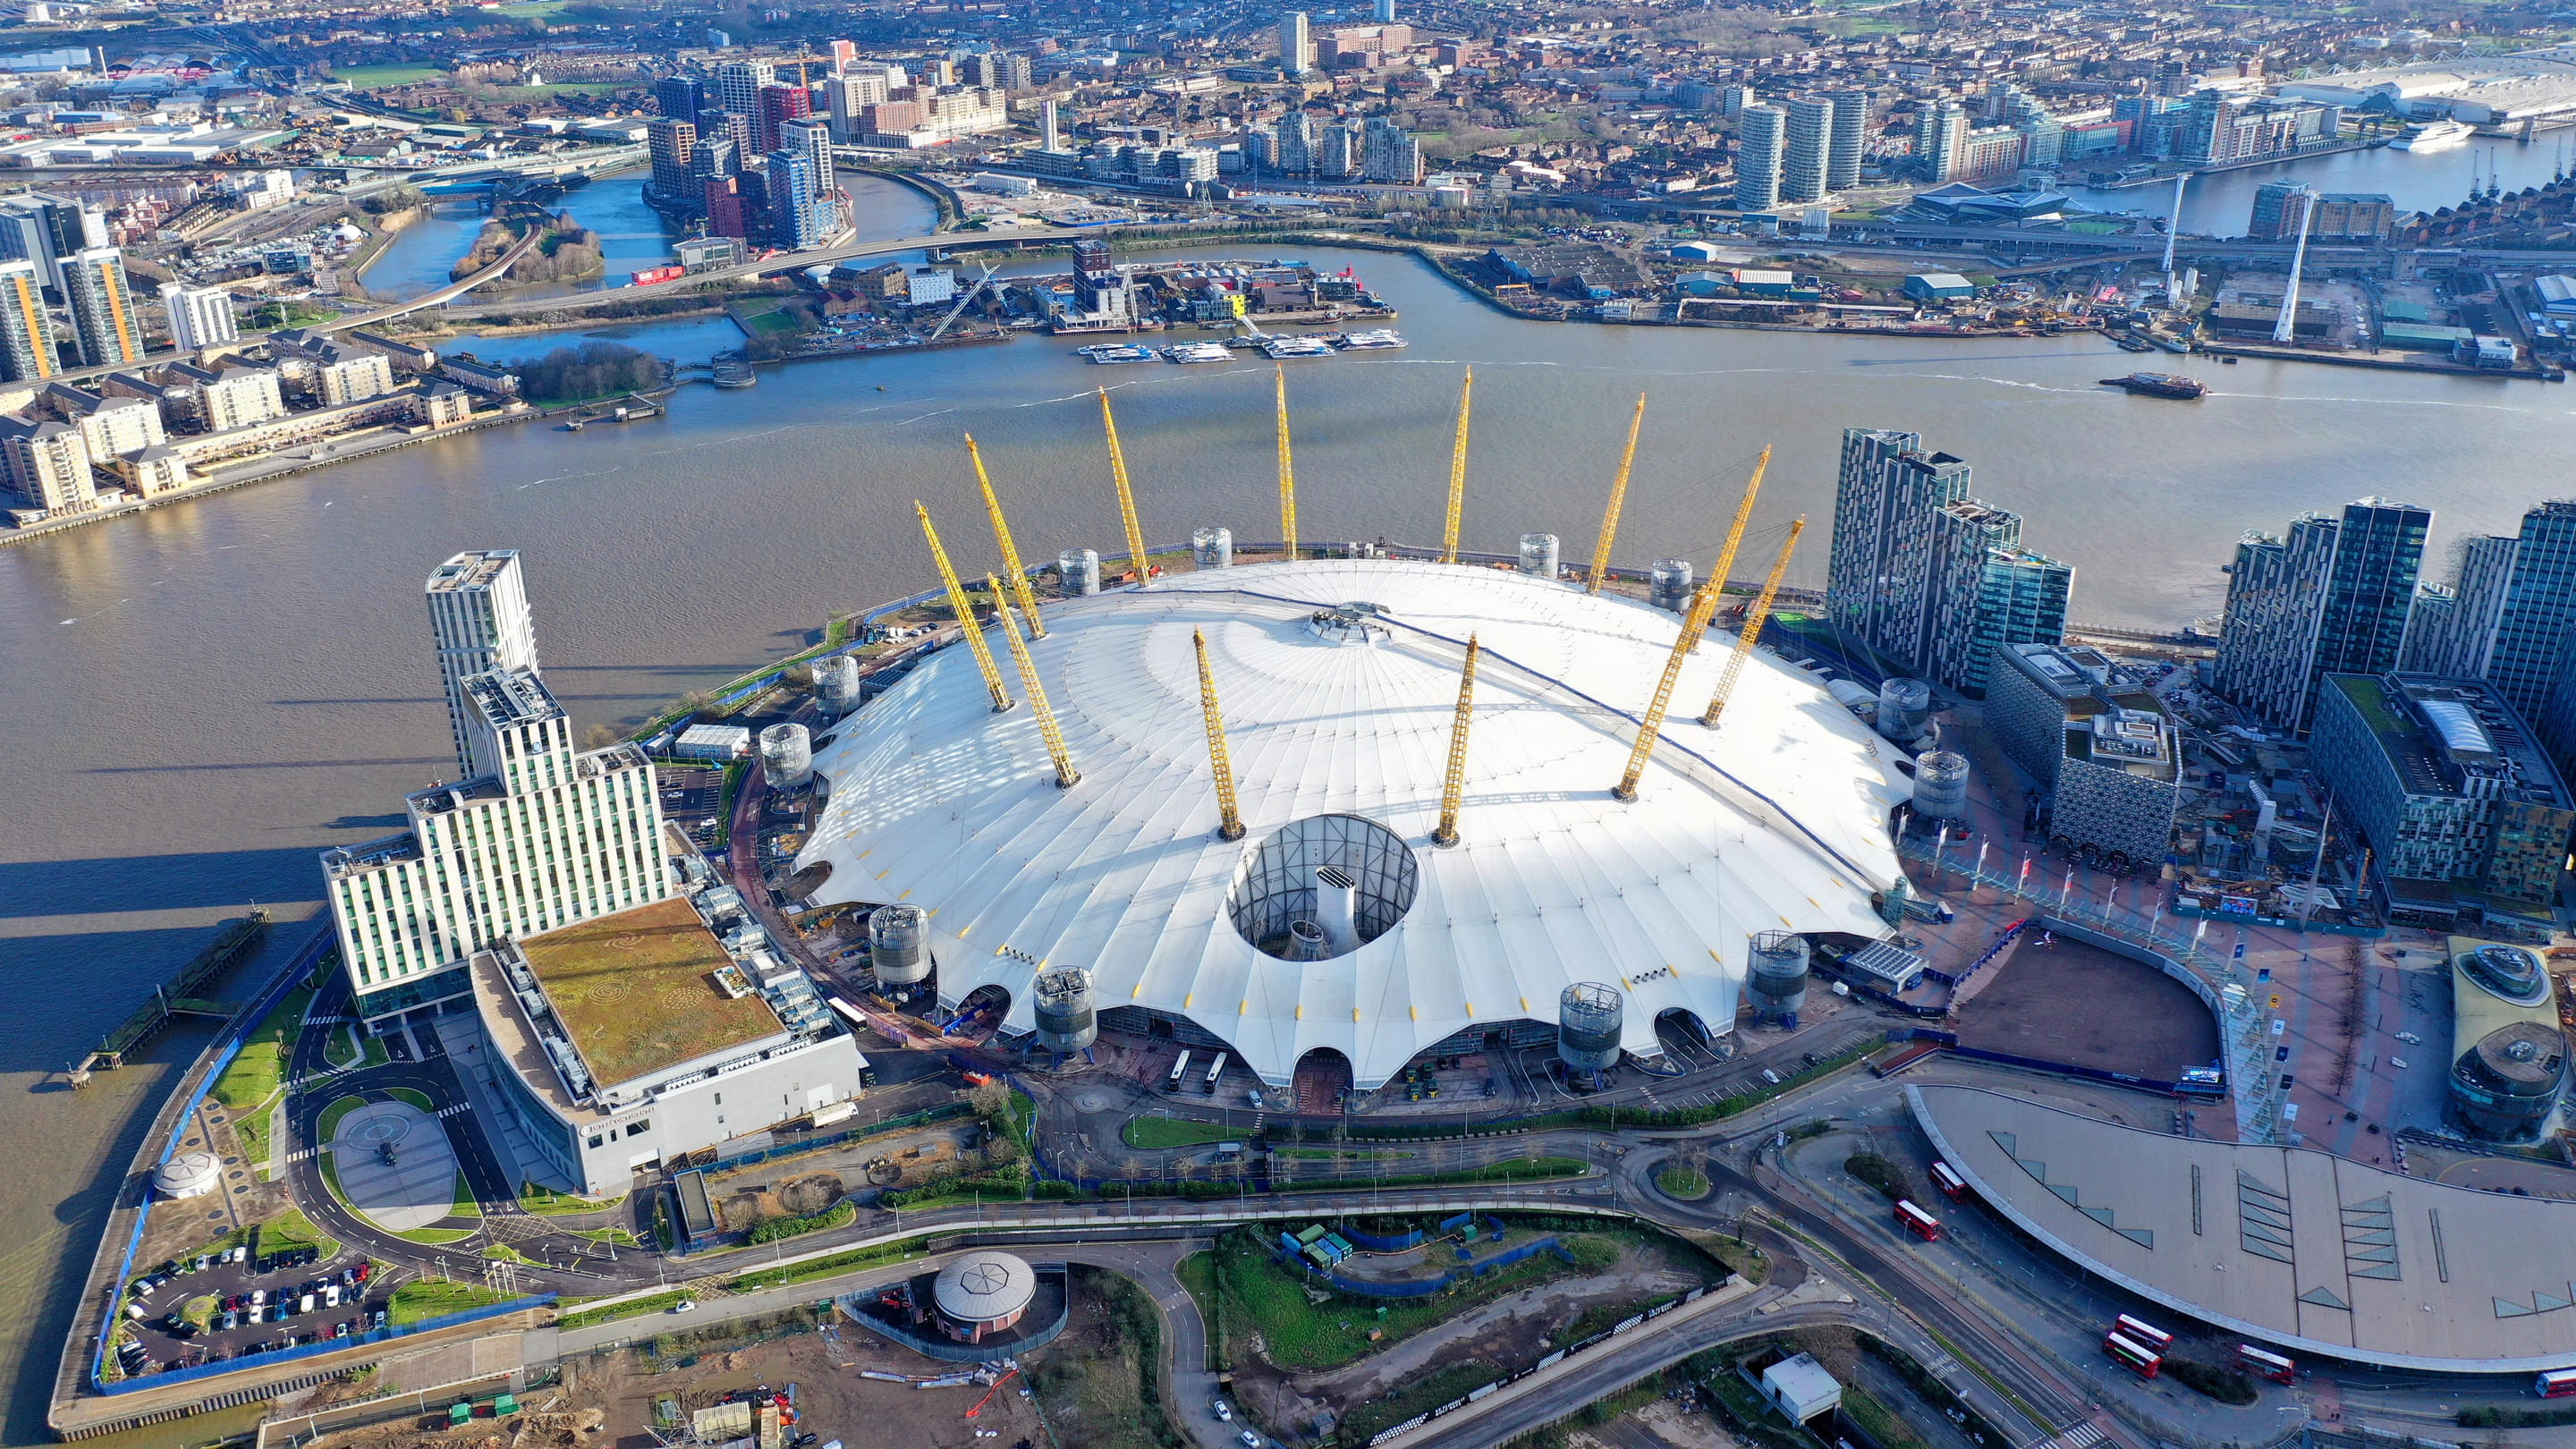 The O2 Arena Overview